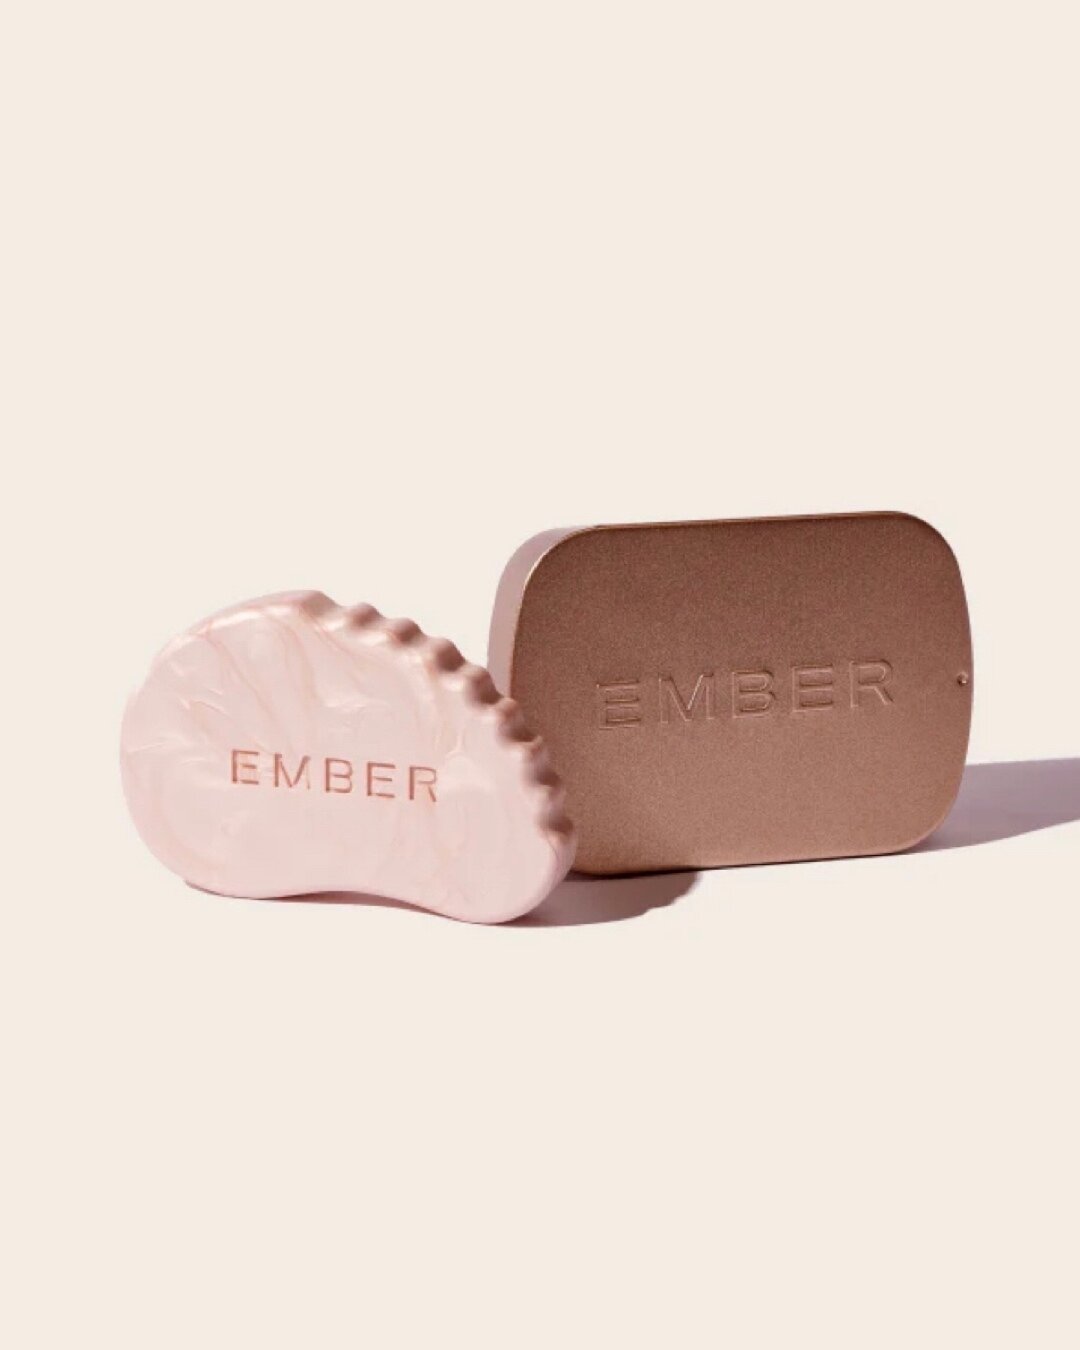 My latest travel must have is a moisturizing gua sha bar. A two-in one that is zero waste.⁠
⁠
Here are the deets:⁠
Called the Sculpt and Glow bar, this is from Toronto-based brand @EmberWellness. ⁠
⁠
The moisturizing bar, made of shea butter and othe